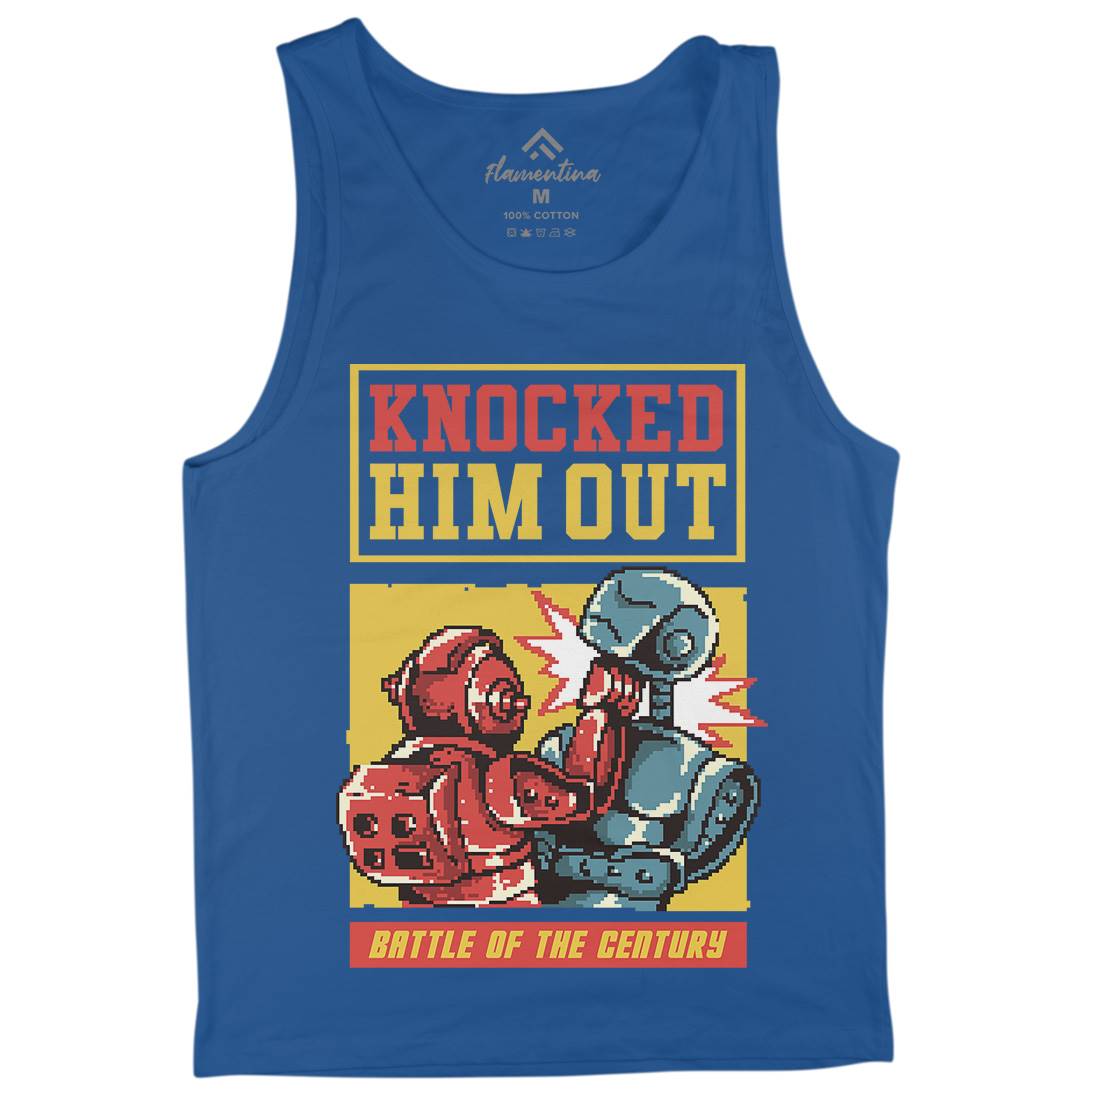 Knocked Him Out Mens Tank Top Vest Space B923